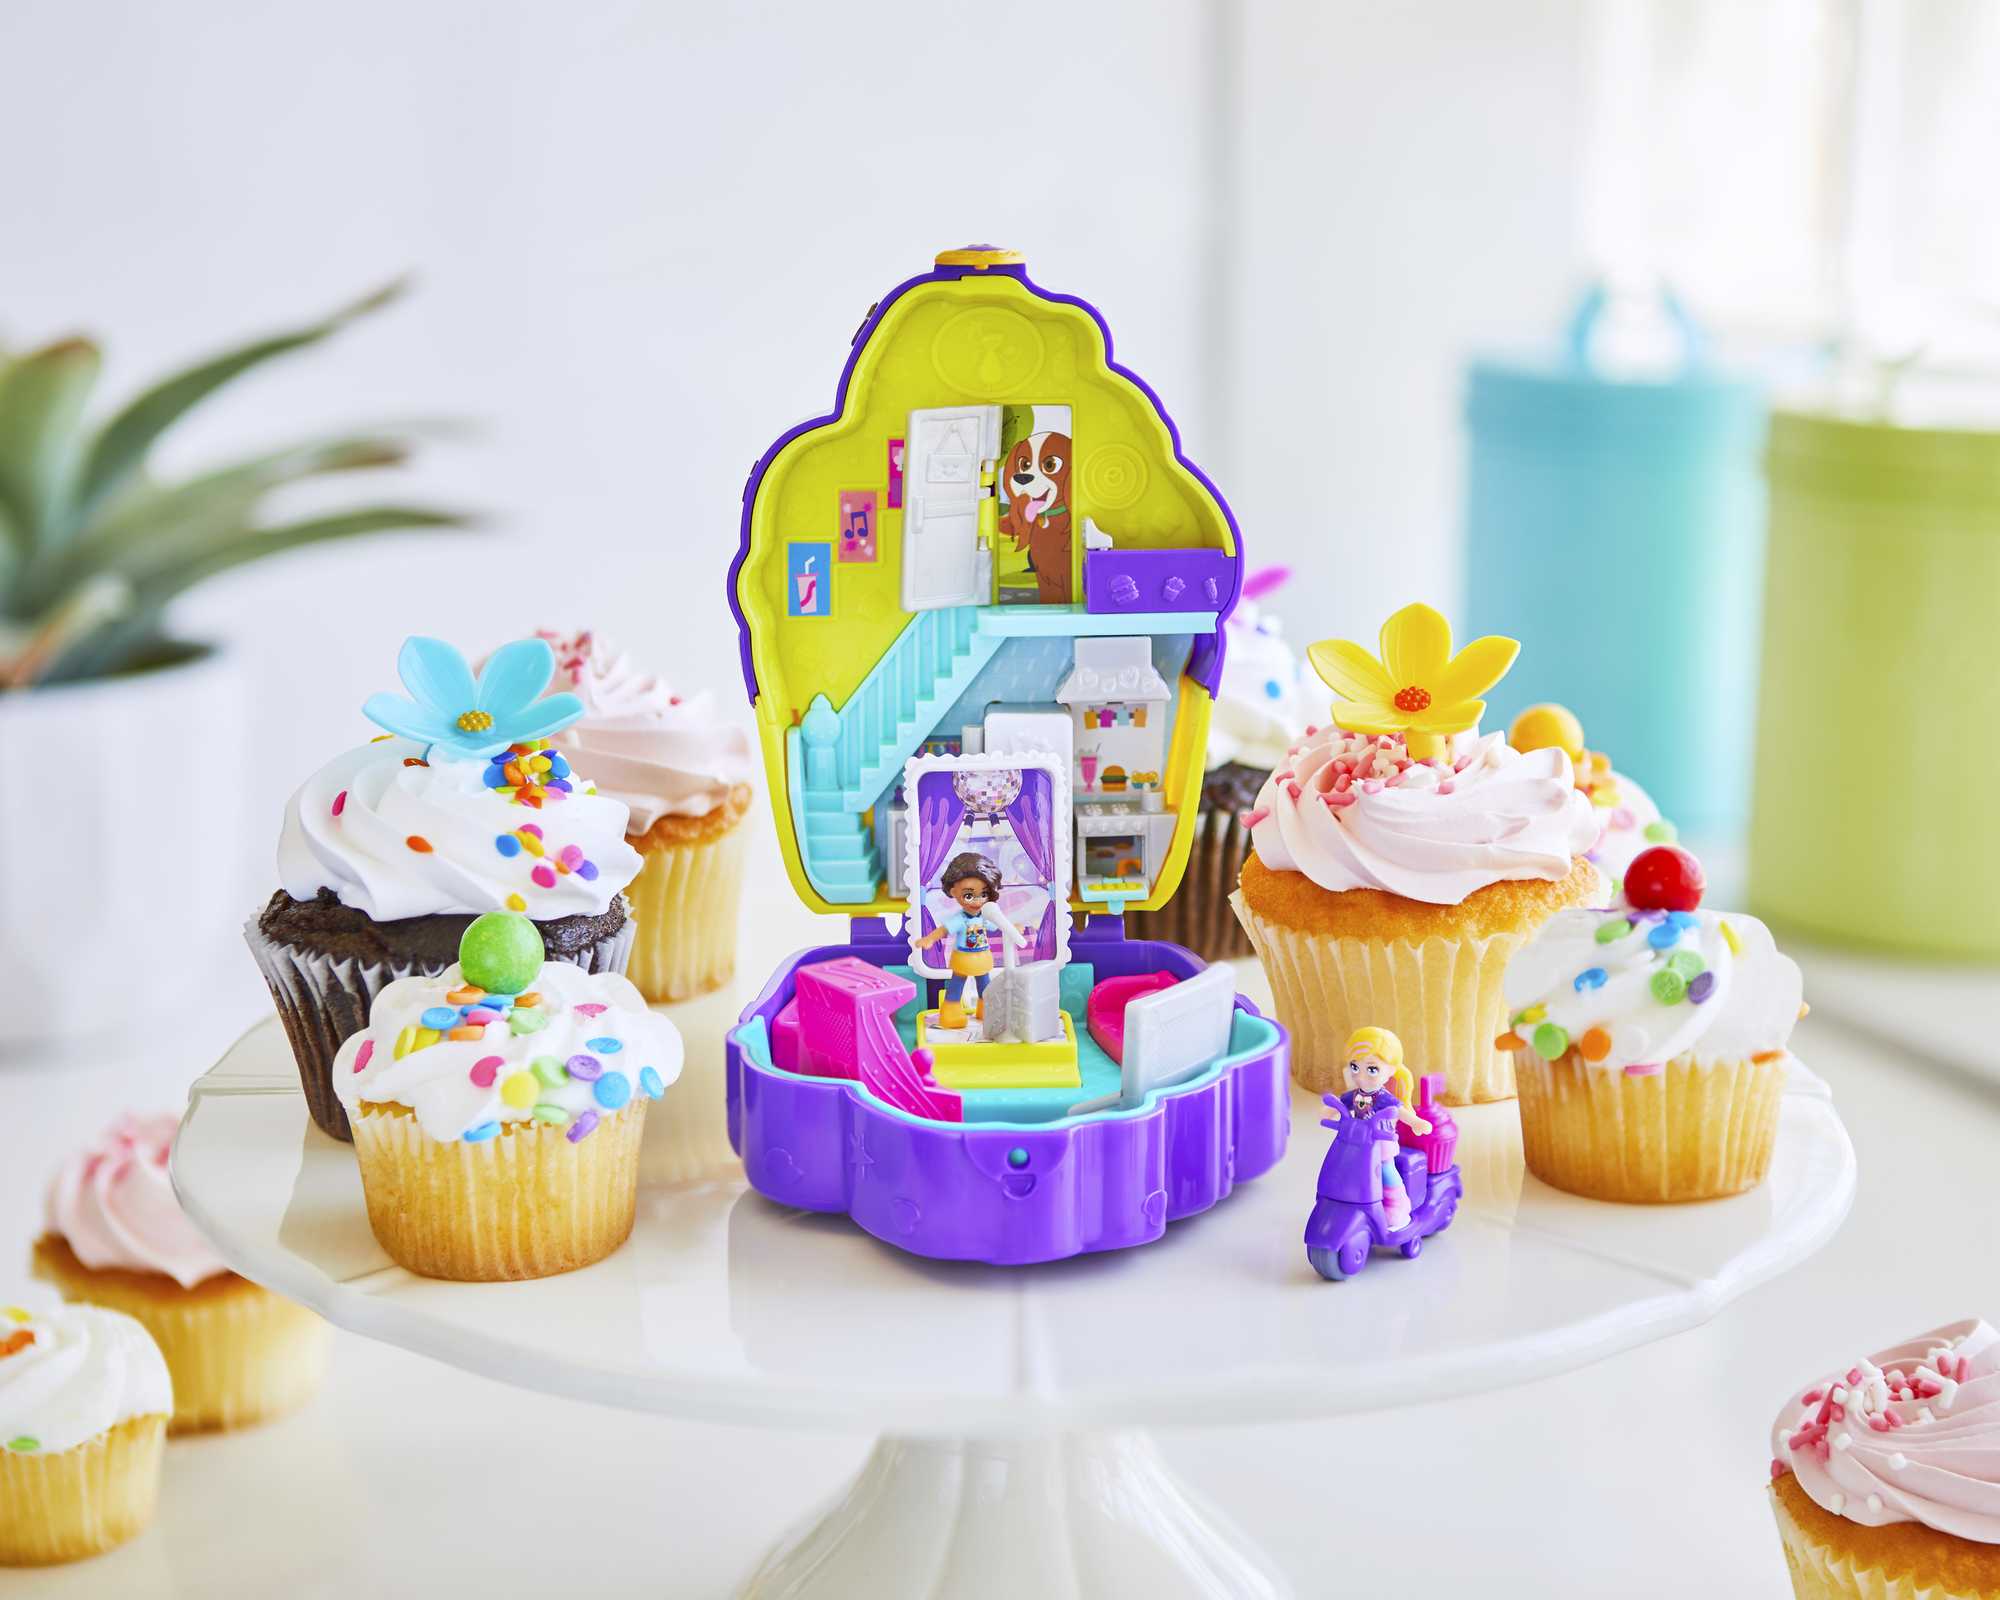 Polly Pocket Pocket Sweet Treat Cupcake Cafe-Themed Compact with Dolls - image 5 of 8